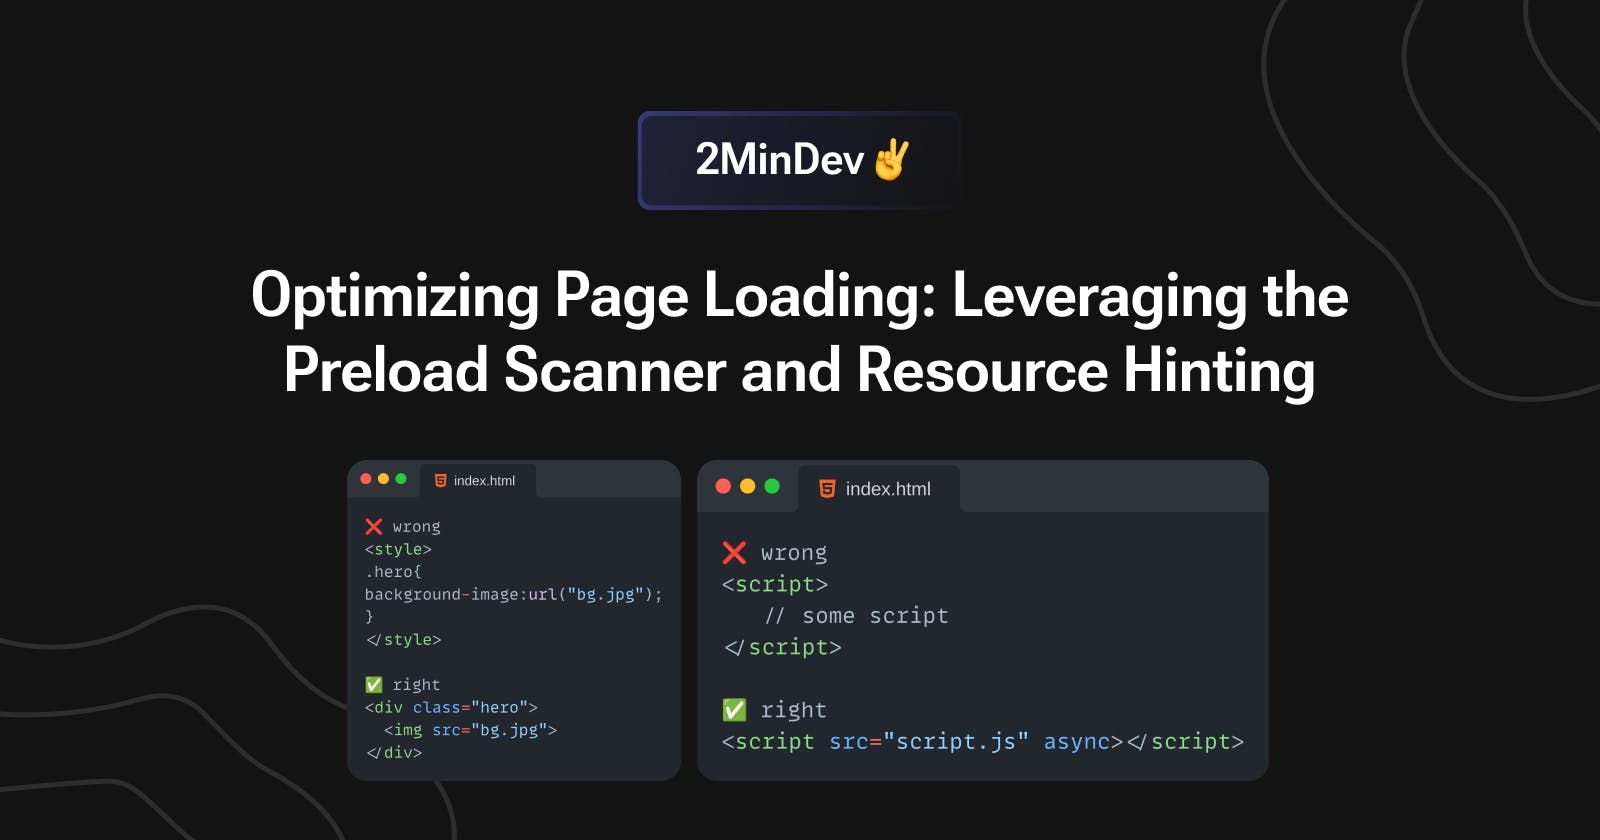 Optimizing Page Loading: Leveraging the Preload Scanner and Resource Hinting